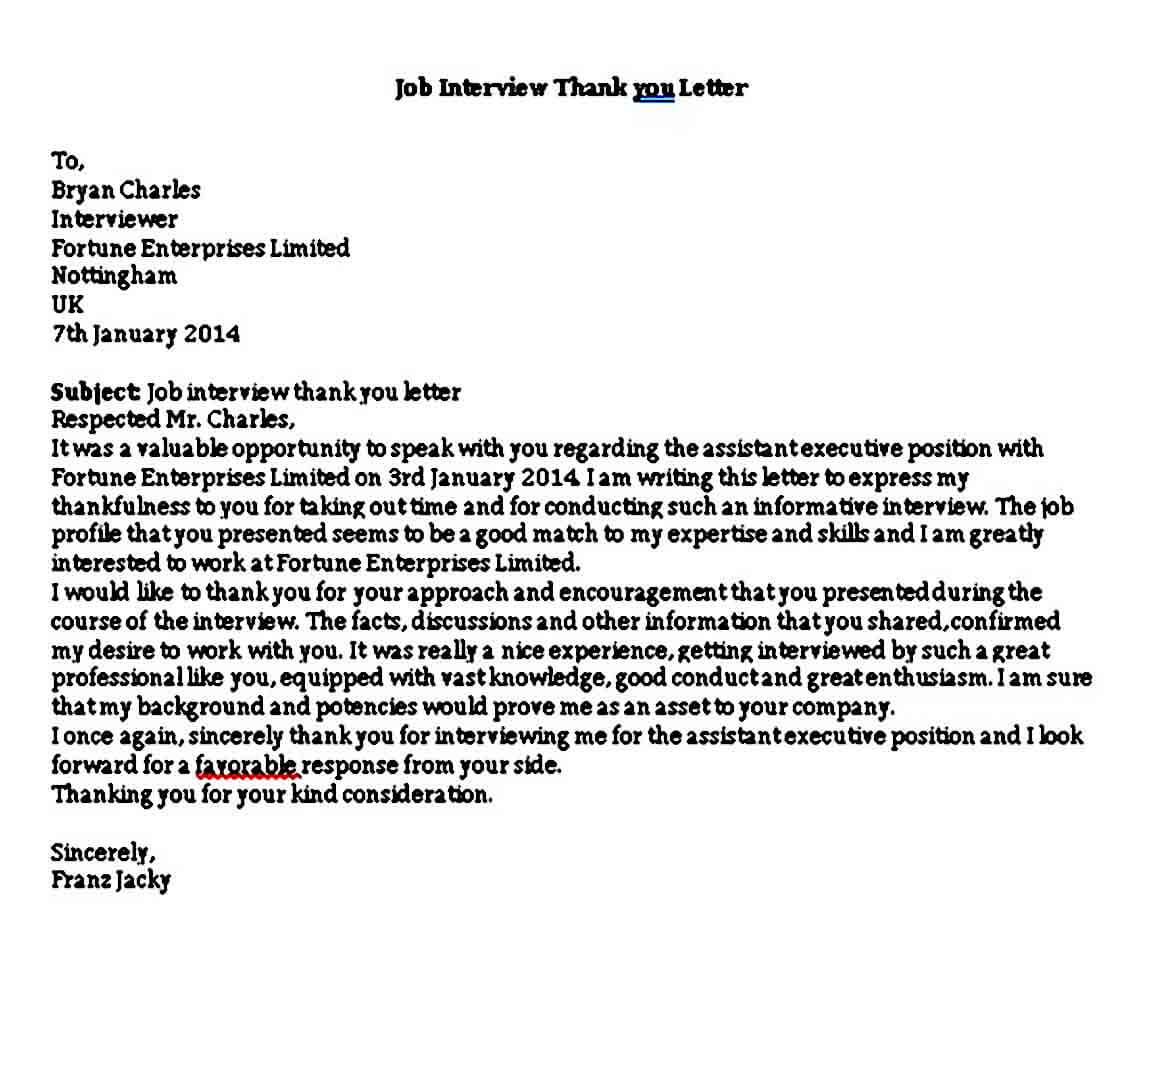 Job Interview Thank you Letter